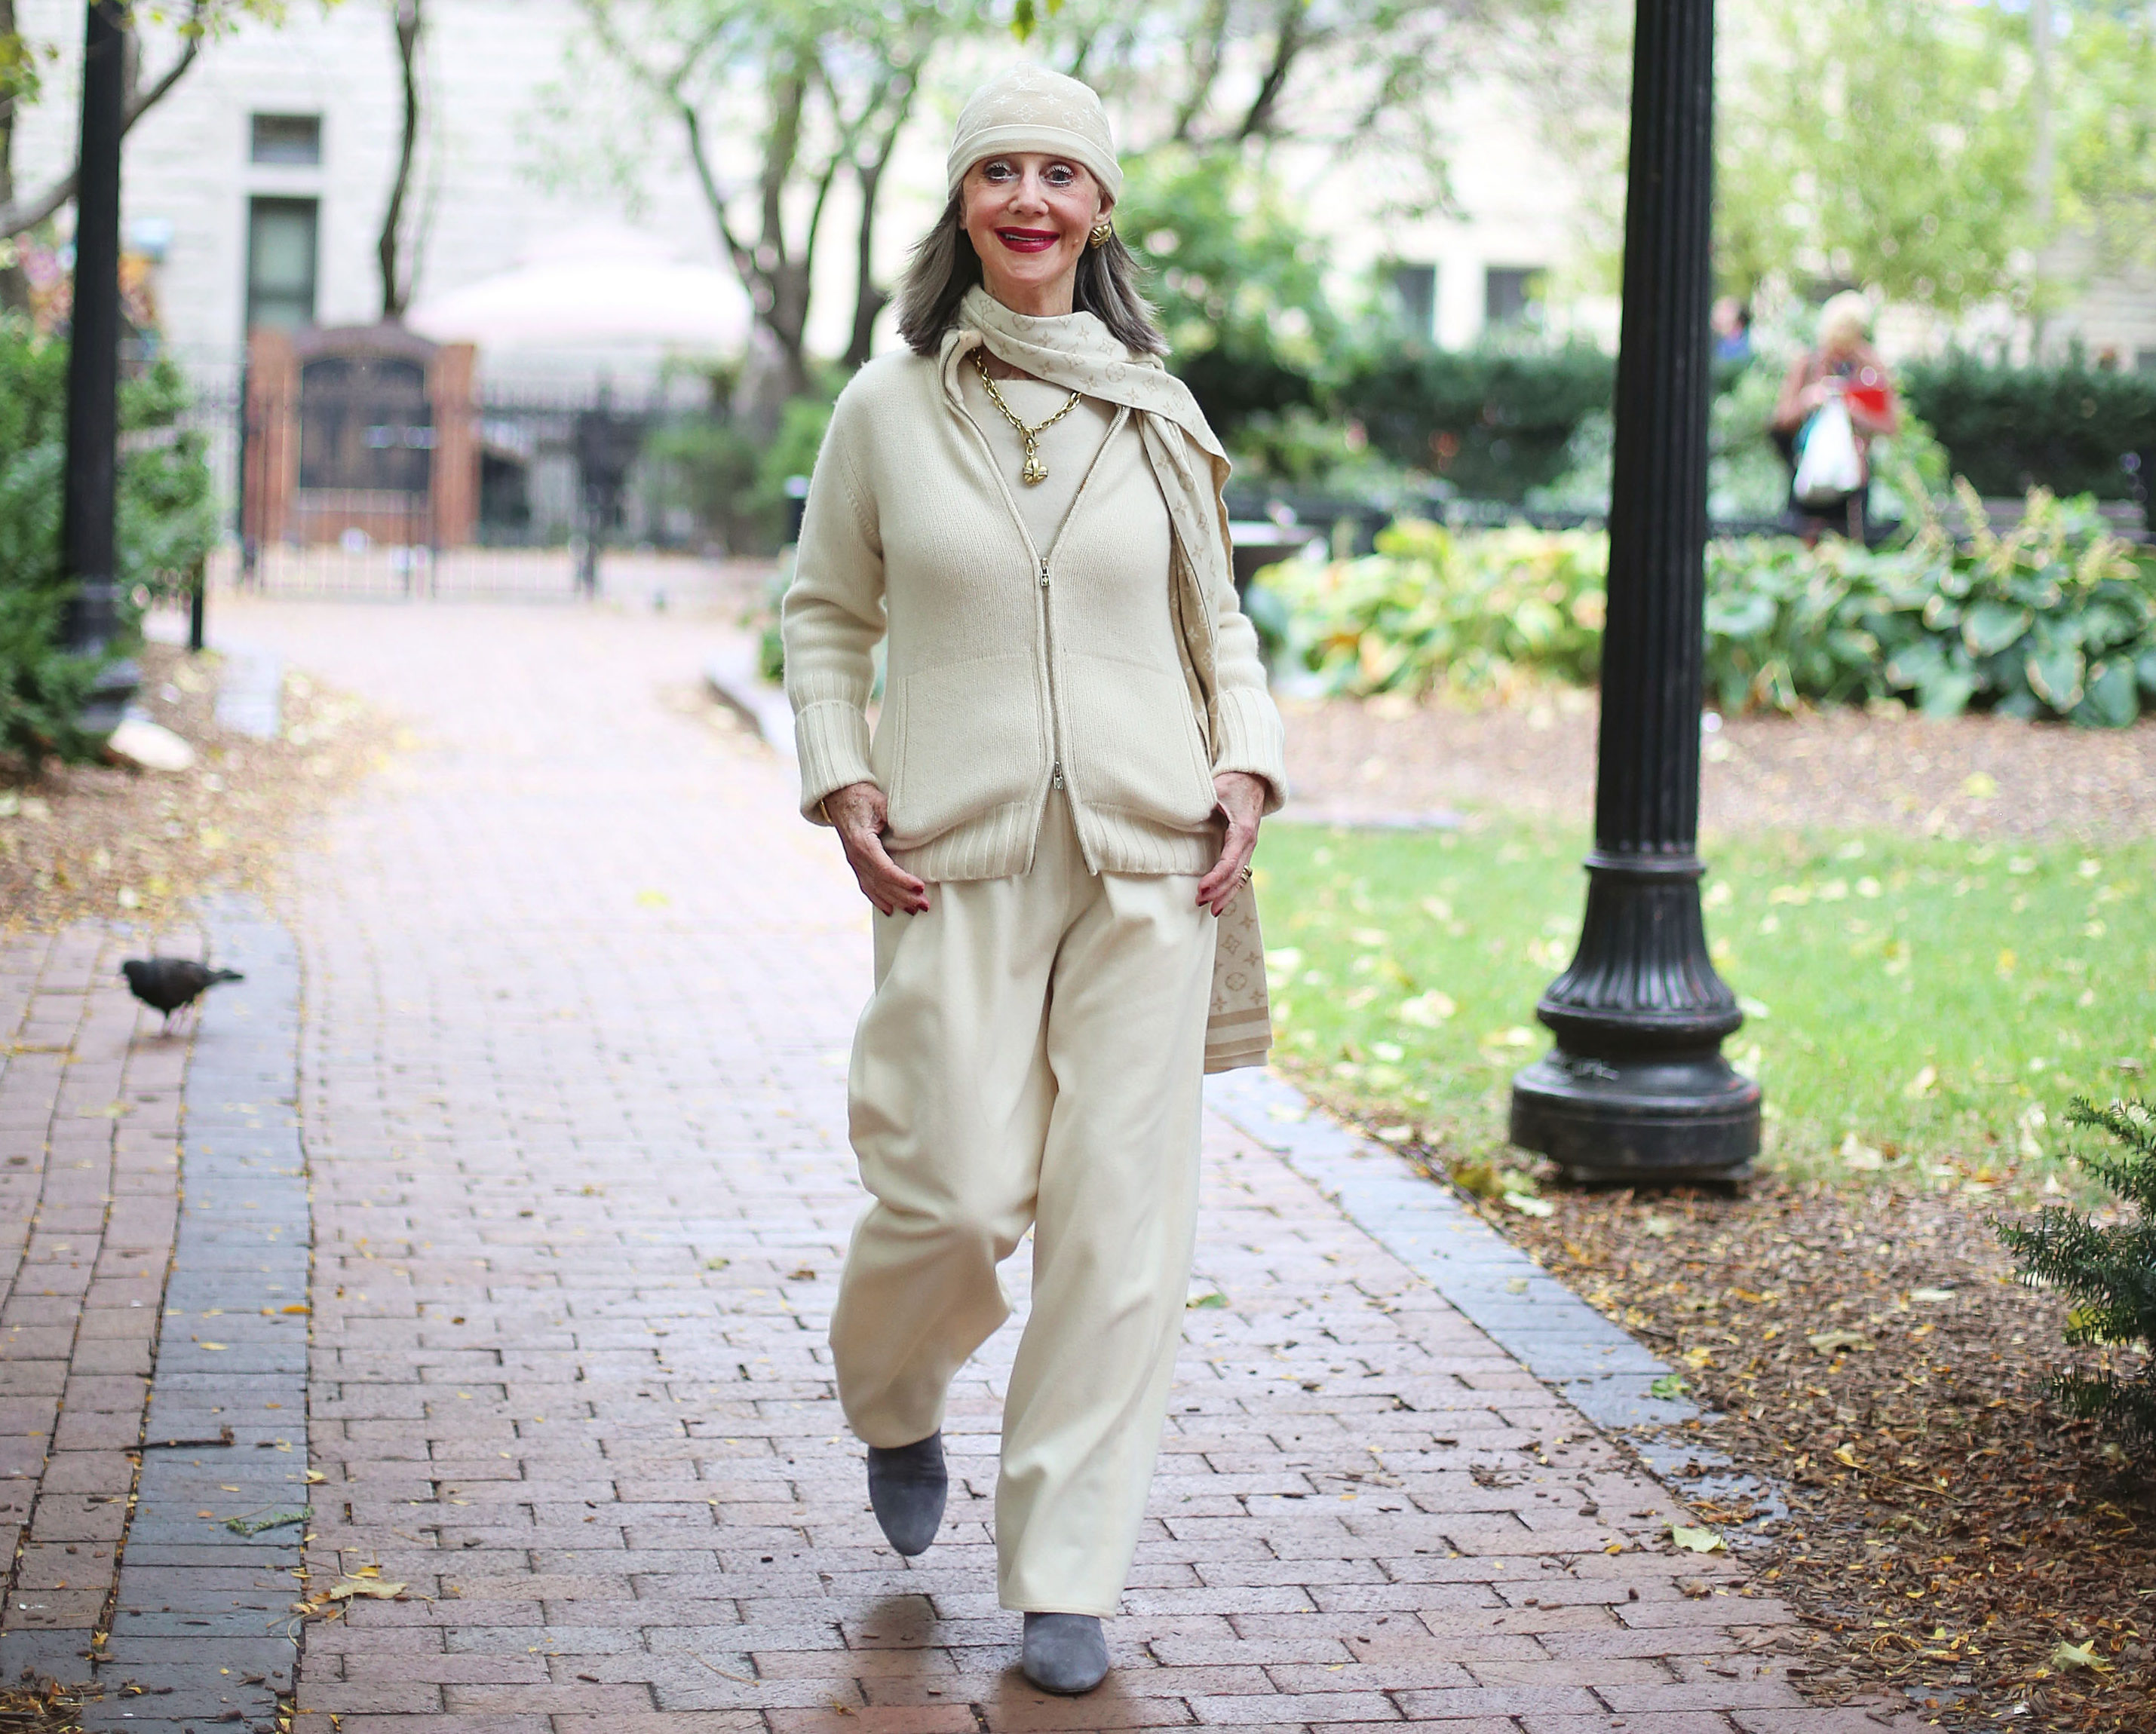 Image of Honey Good in a winter white look from head to to, walking on a brick sidewalk.